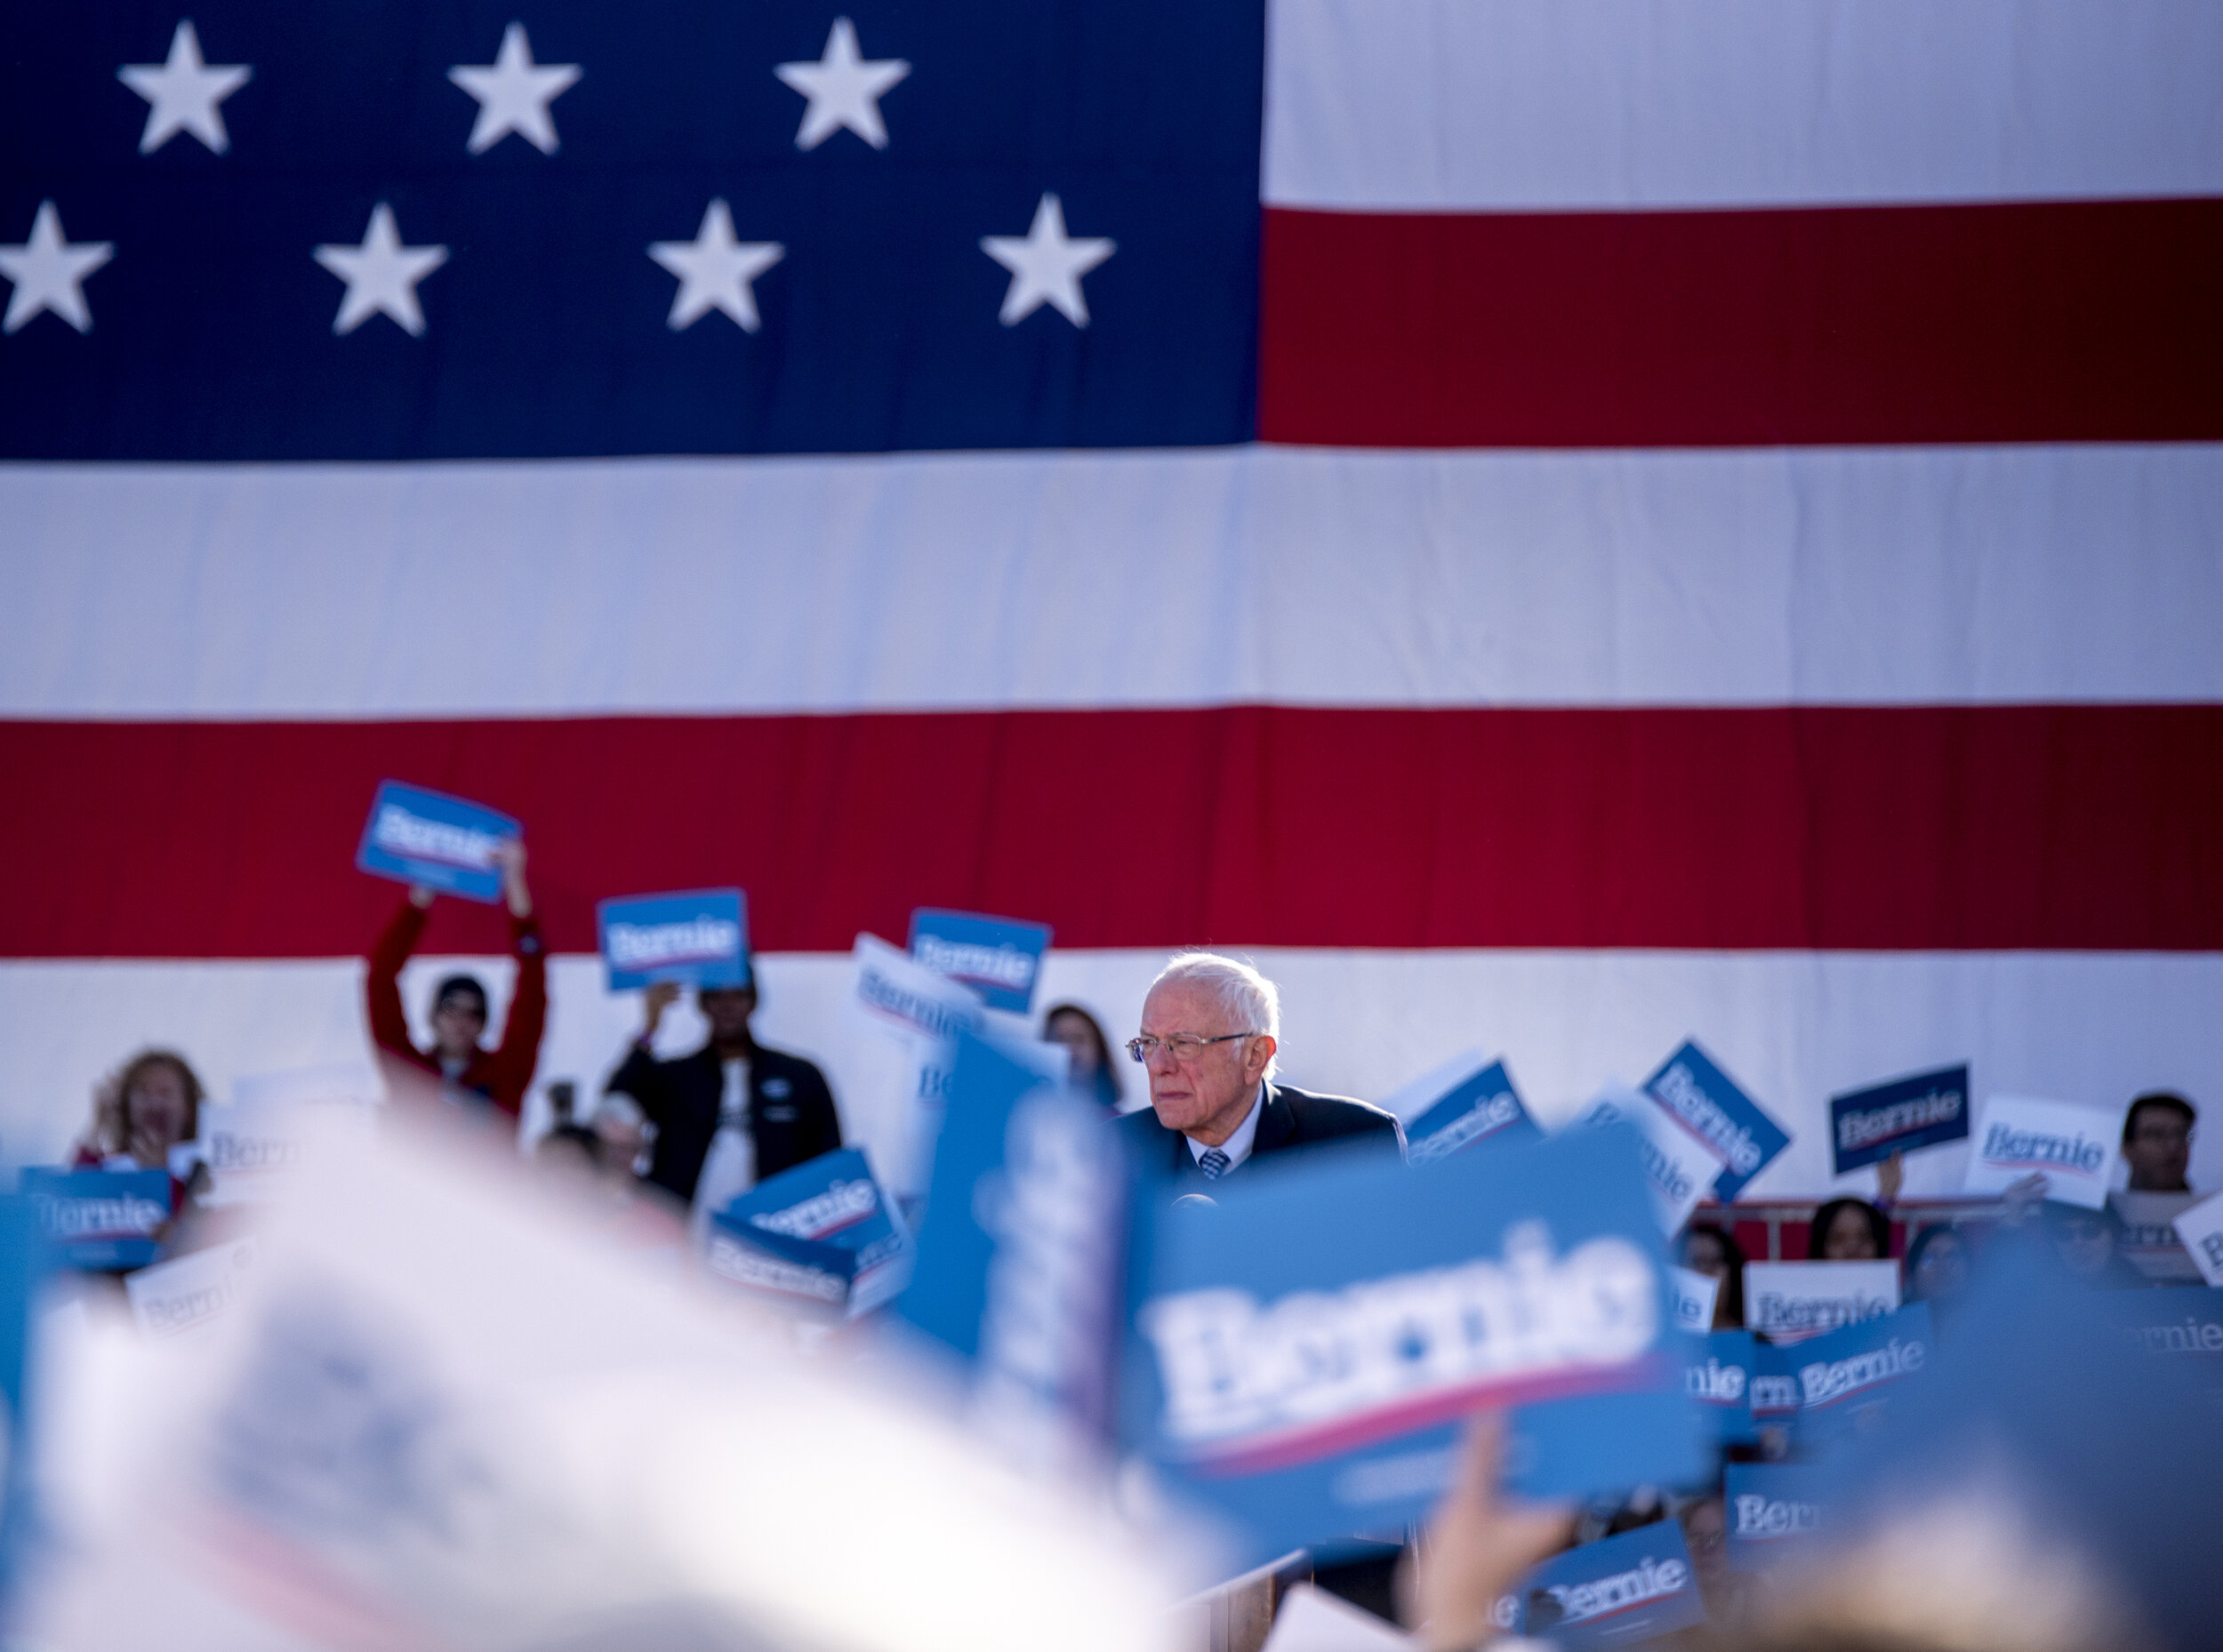  Bernie Sanders speaks to supporters during a campaign rally in Chicago’s Grant Park on March 6, 2020. 